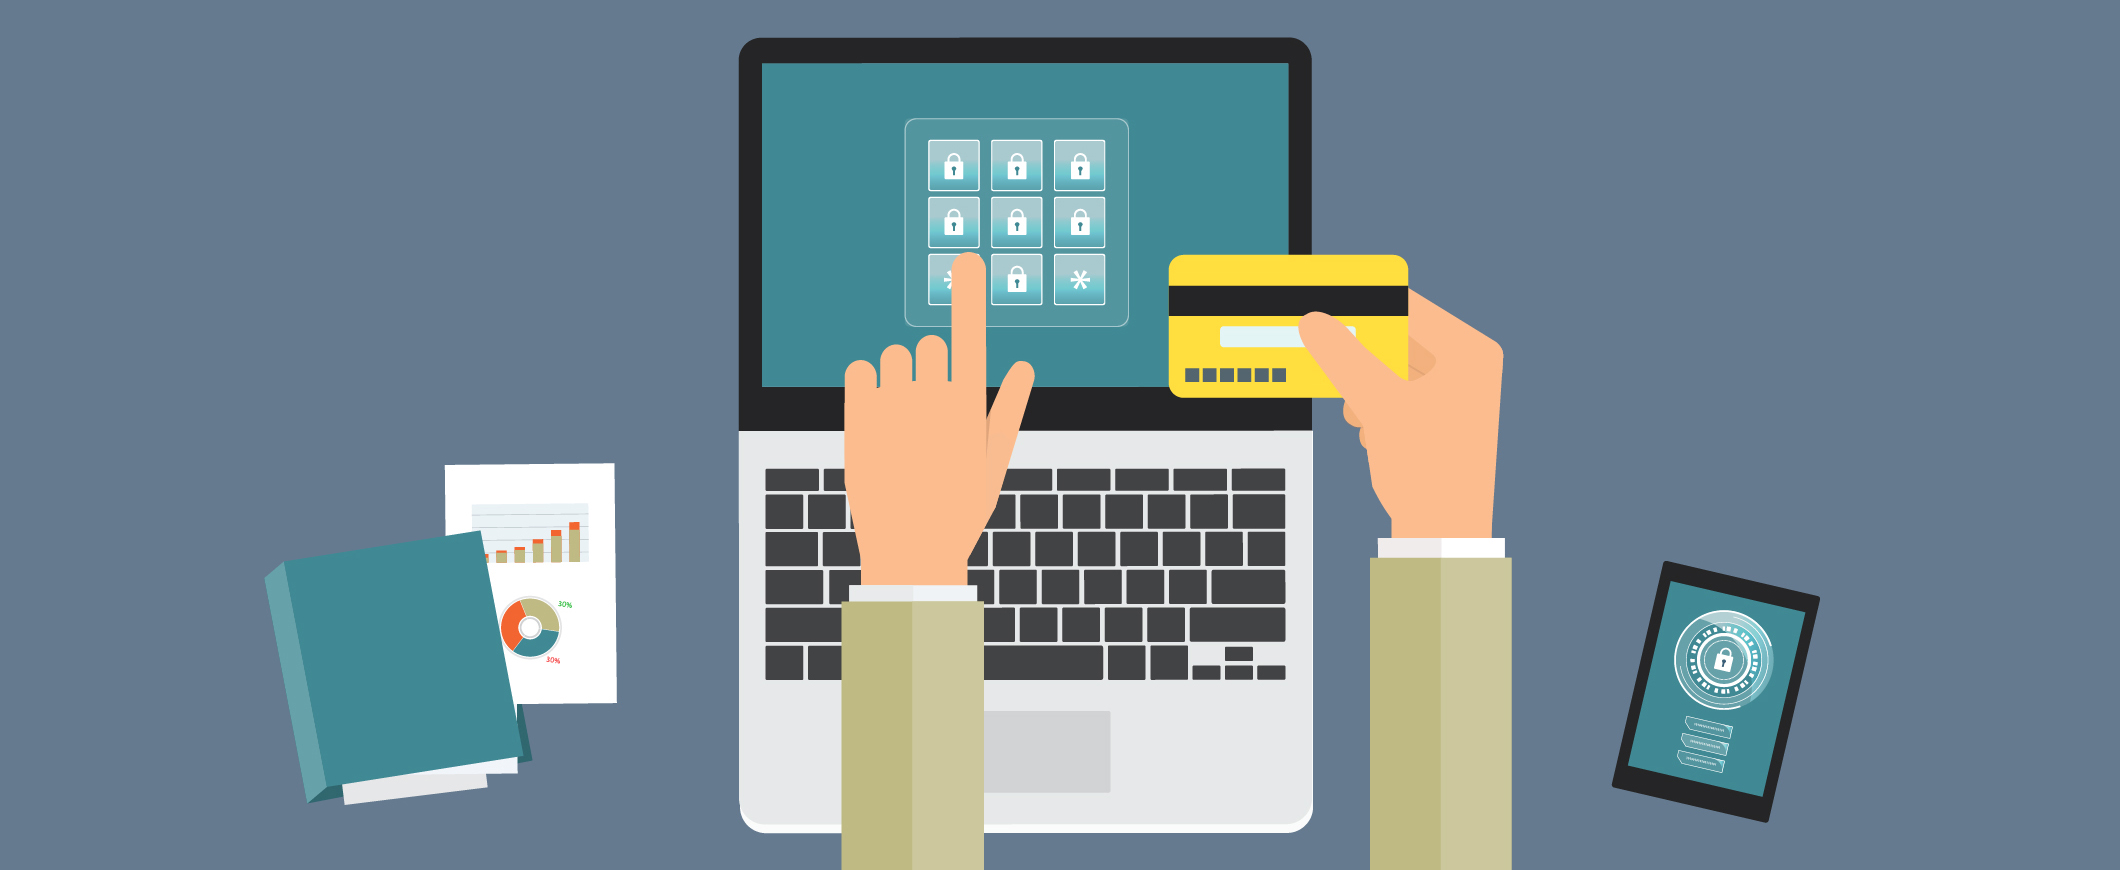 A graphic depicting a laptop and two hands making a purchase by entering in a credit card number.